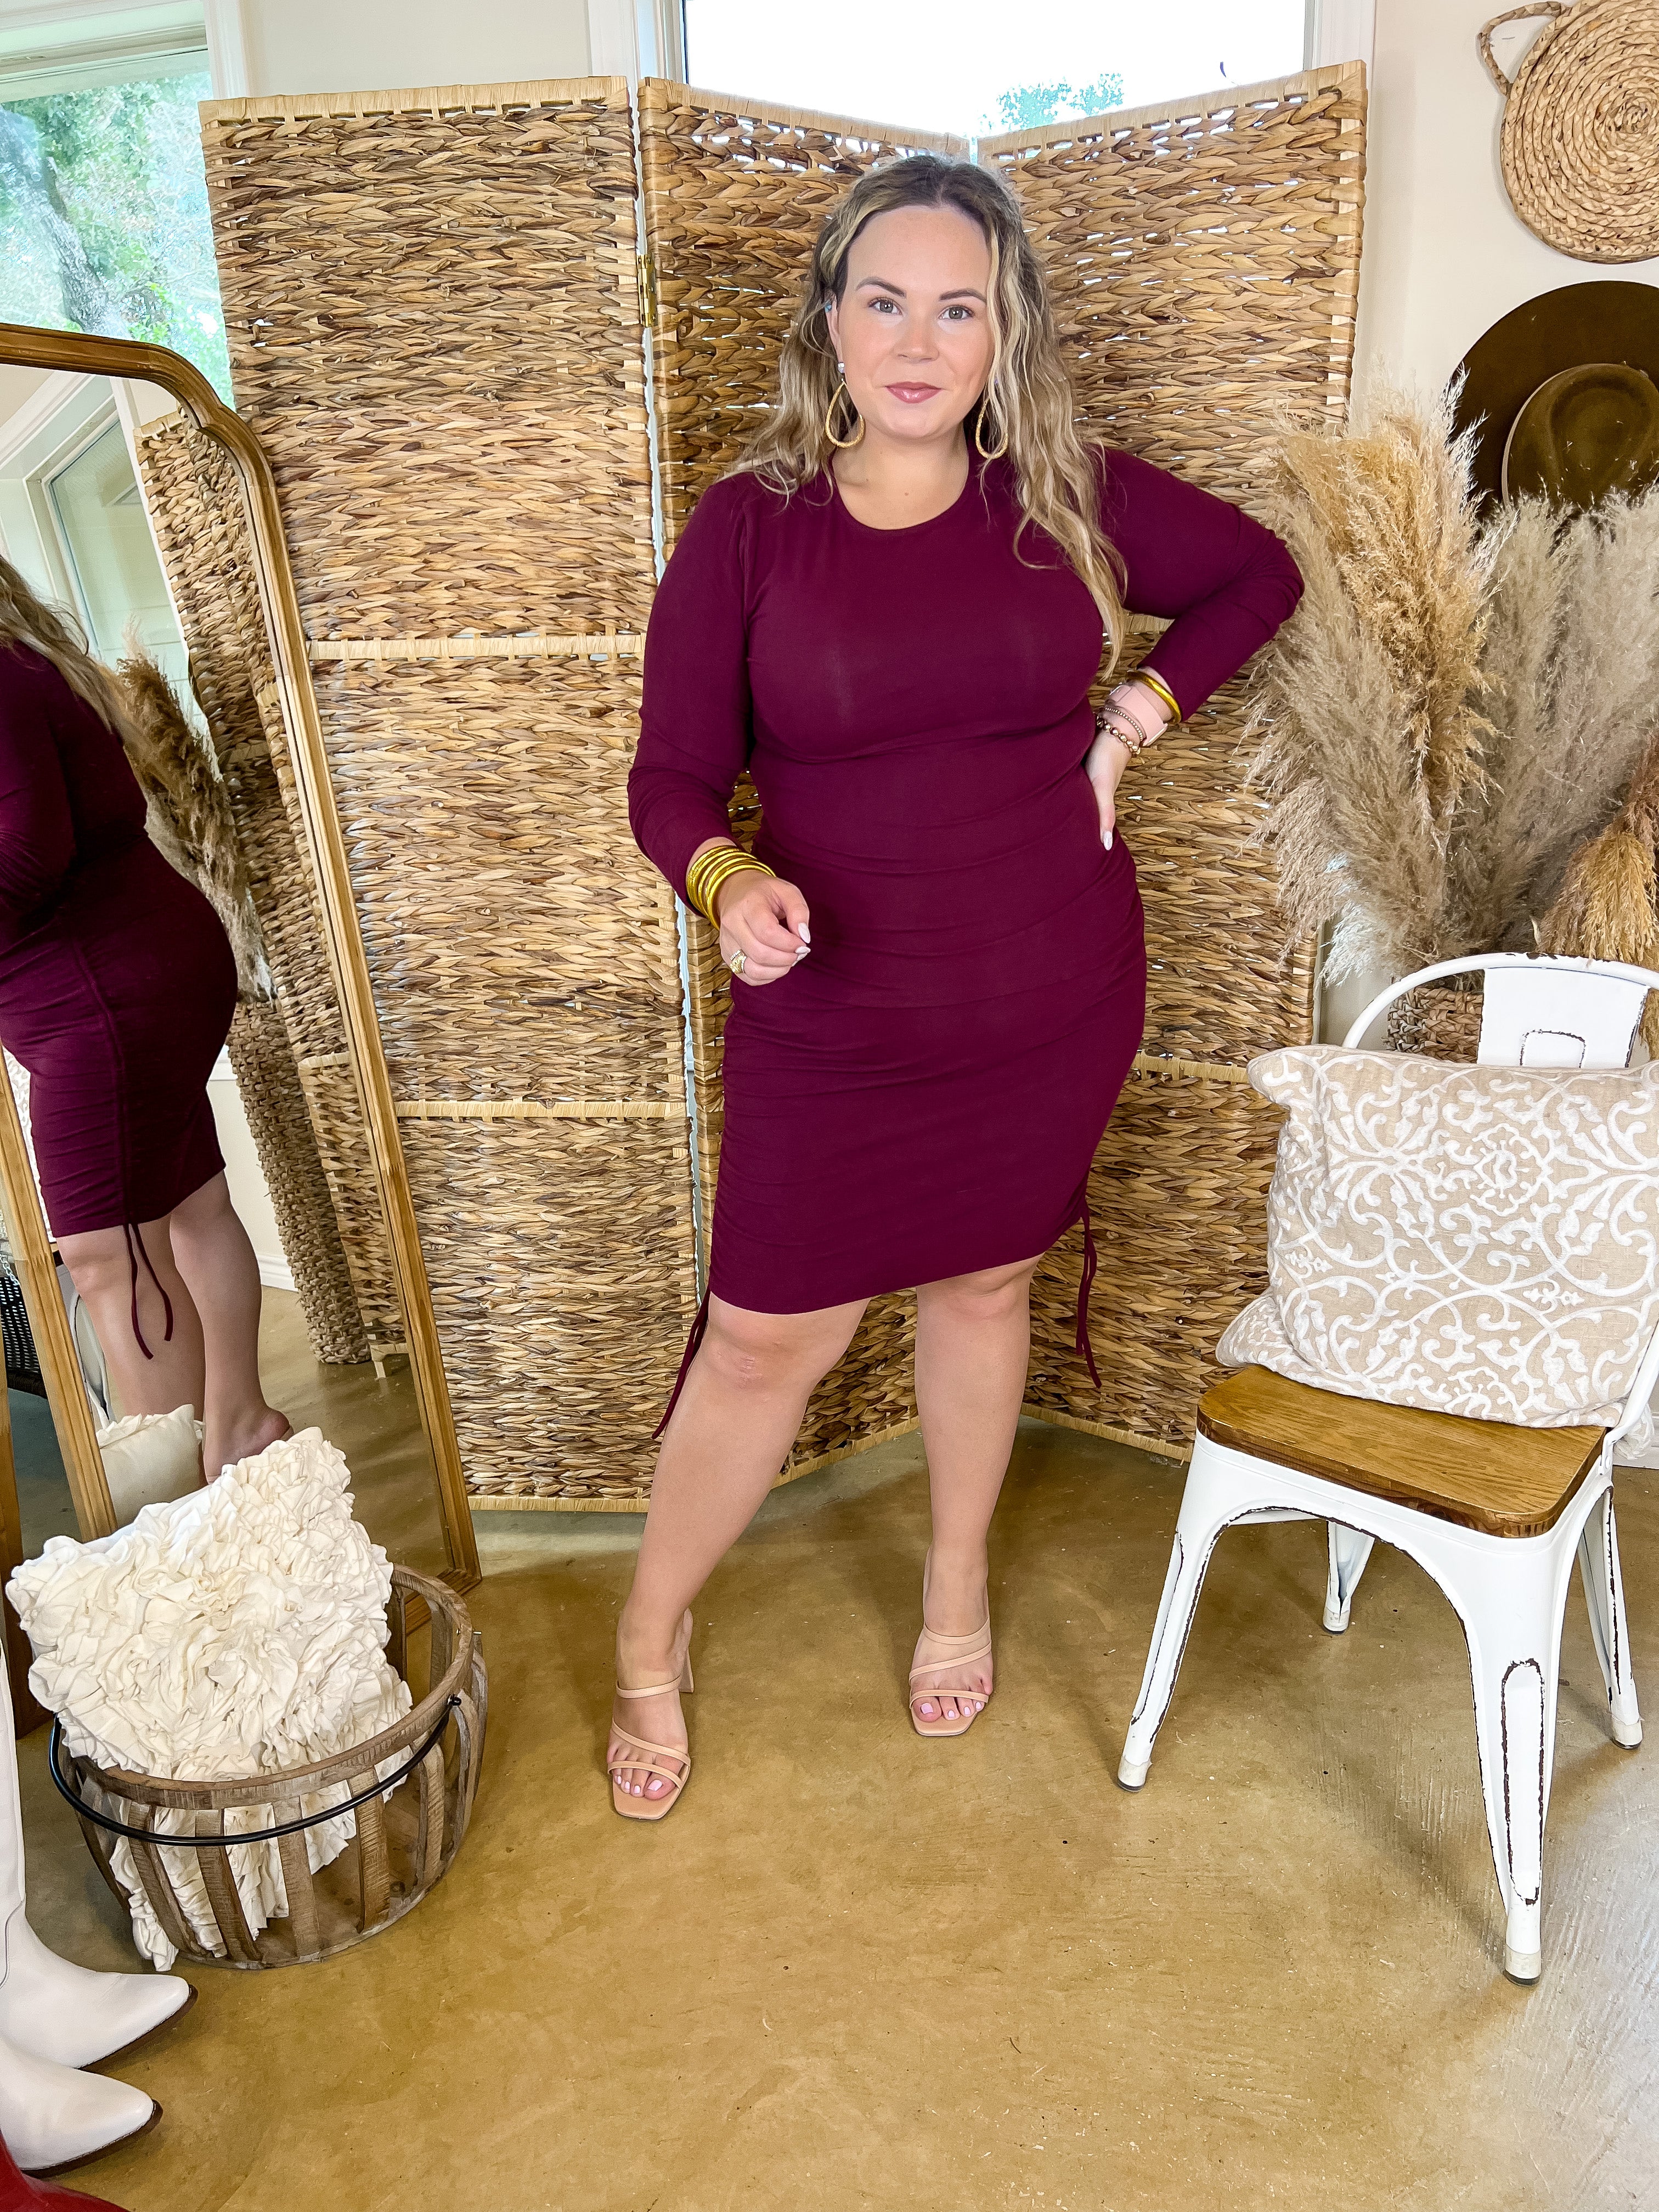 Felt A Chill Long Sleeve Fitted Dress with Ruched Drawstring Hips in Maroon - Giddy Up Glamour Boutique